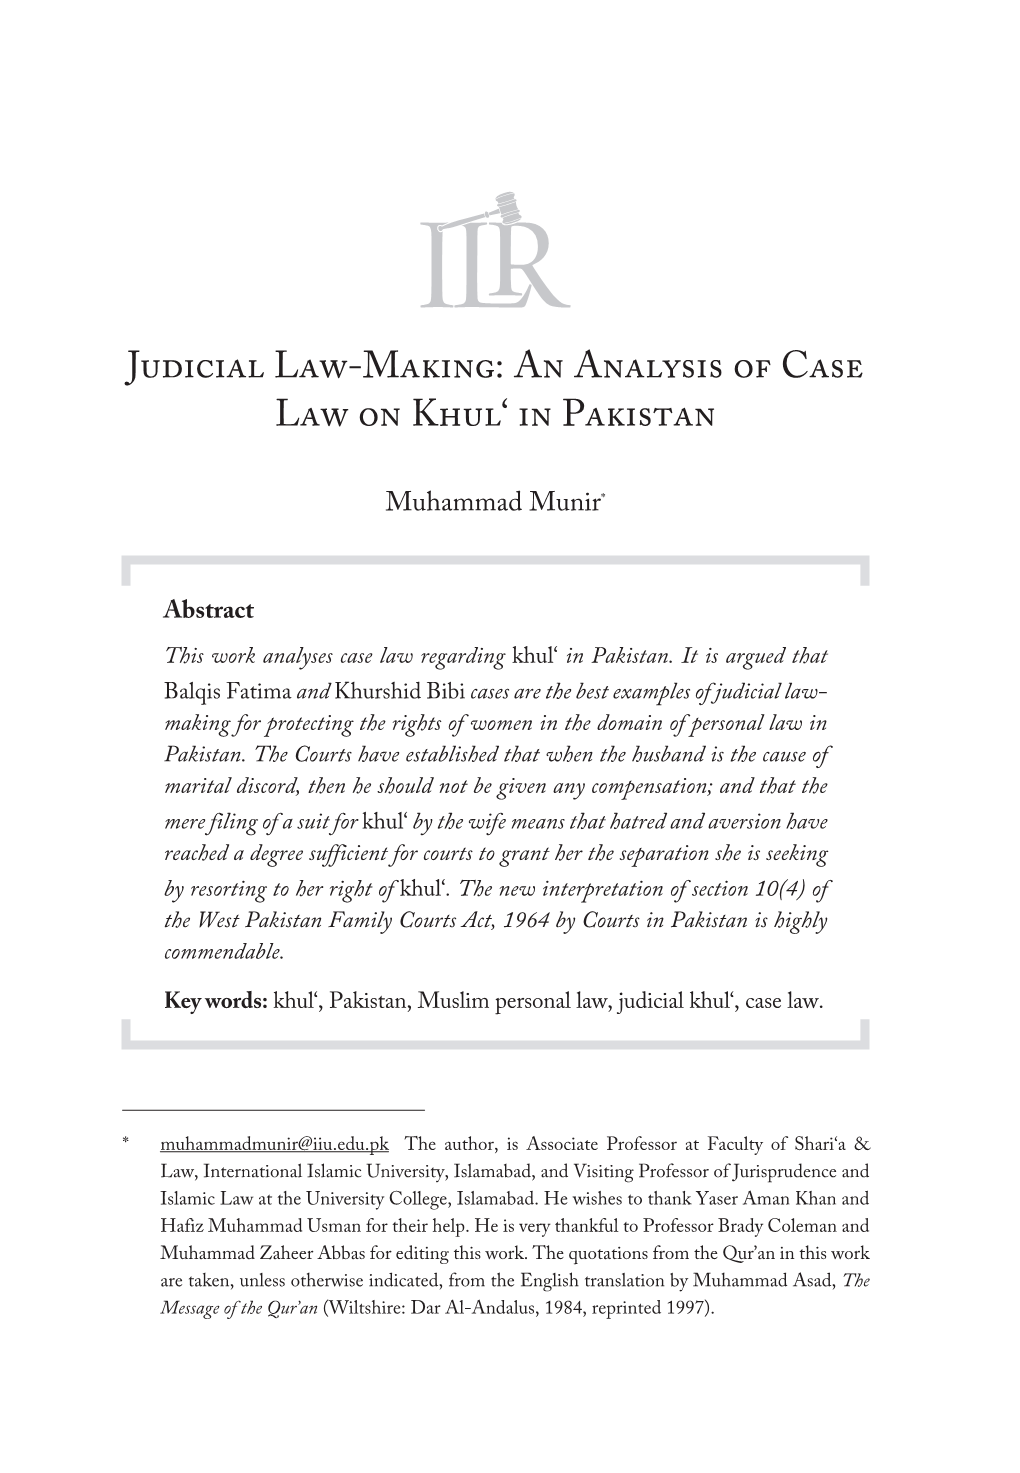 Judicial Law-Making: an Analysis of Case Law on Khul' in Pakistan